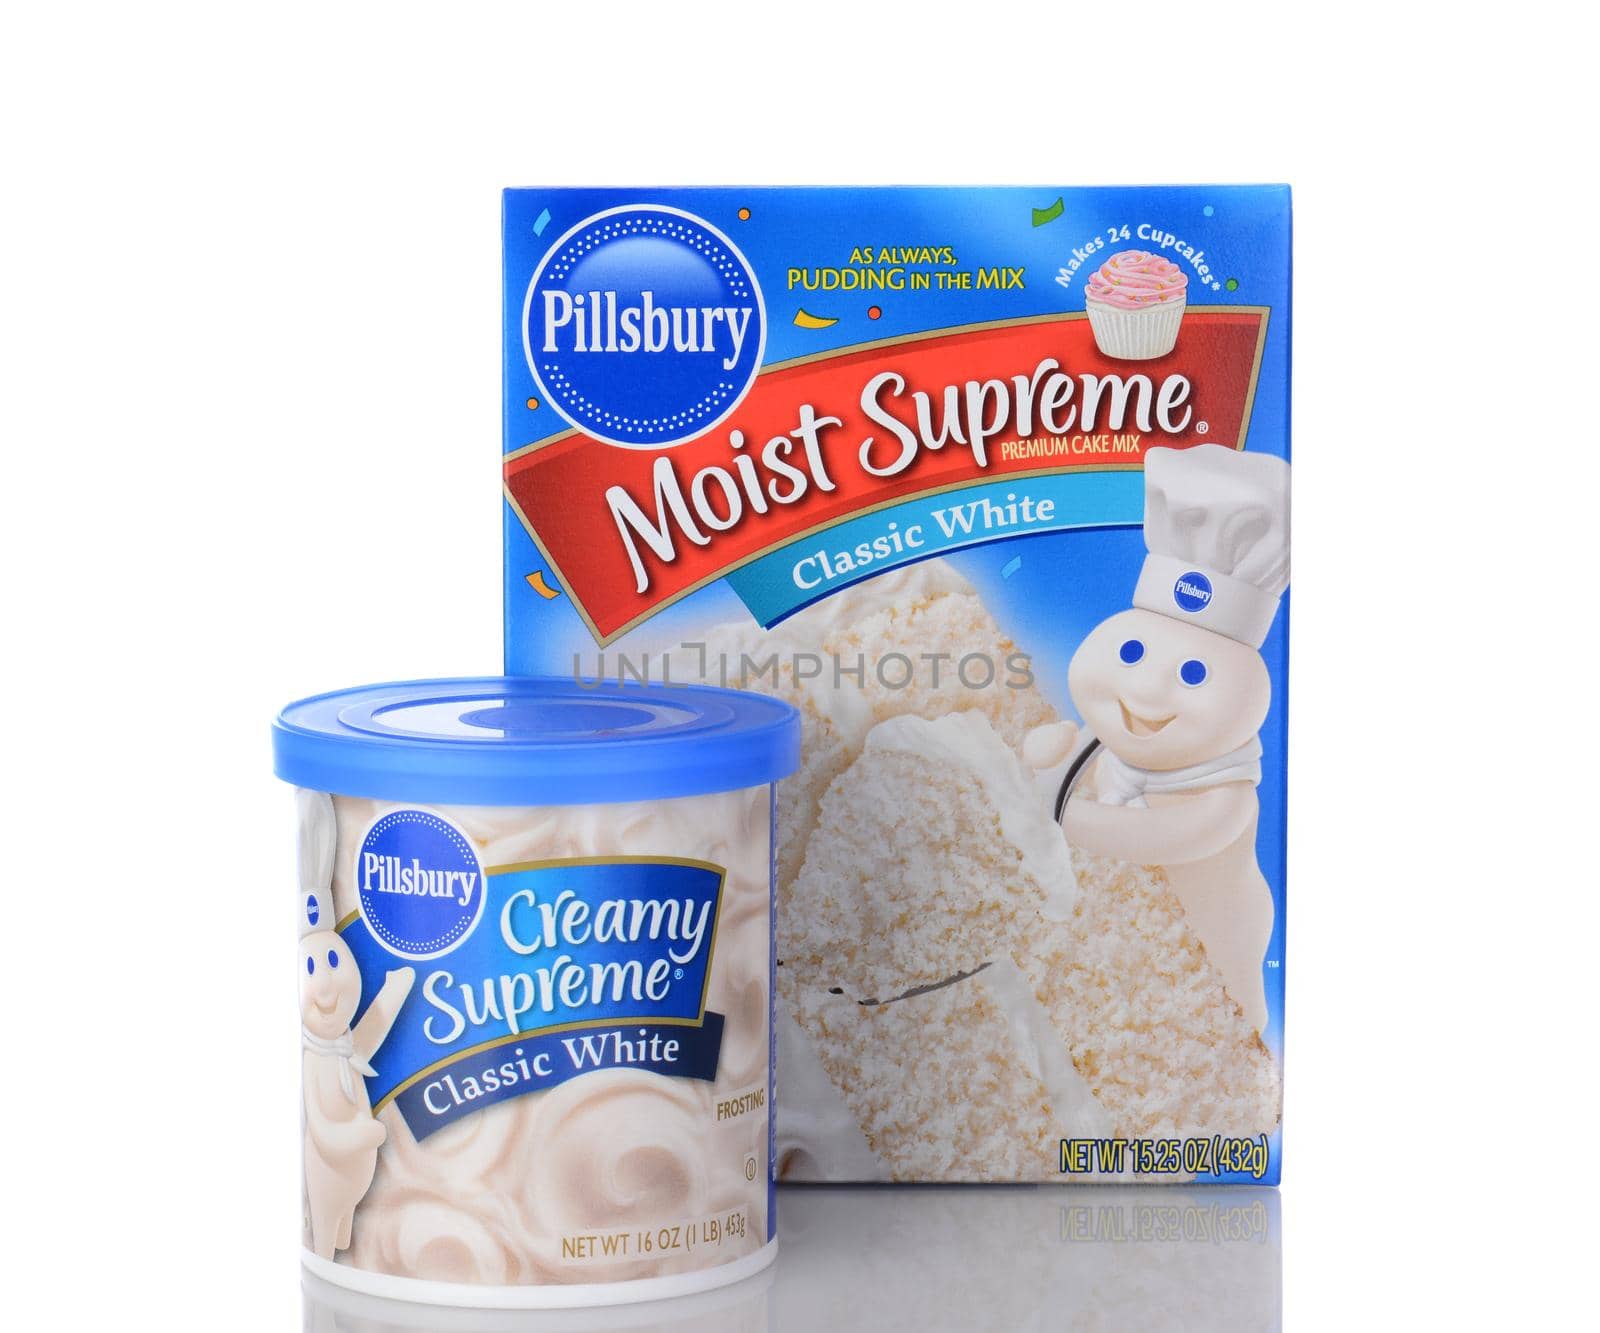 Pillsbury Moist Supreme Cake Mix and Frosting by sCukrov